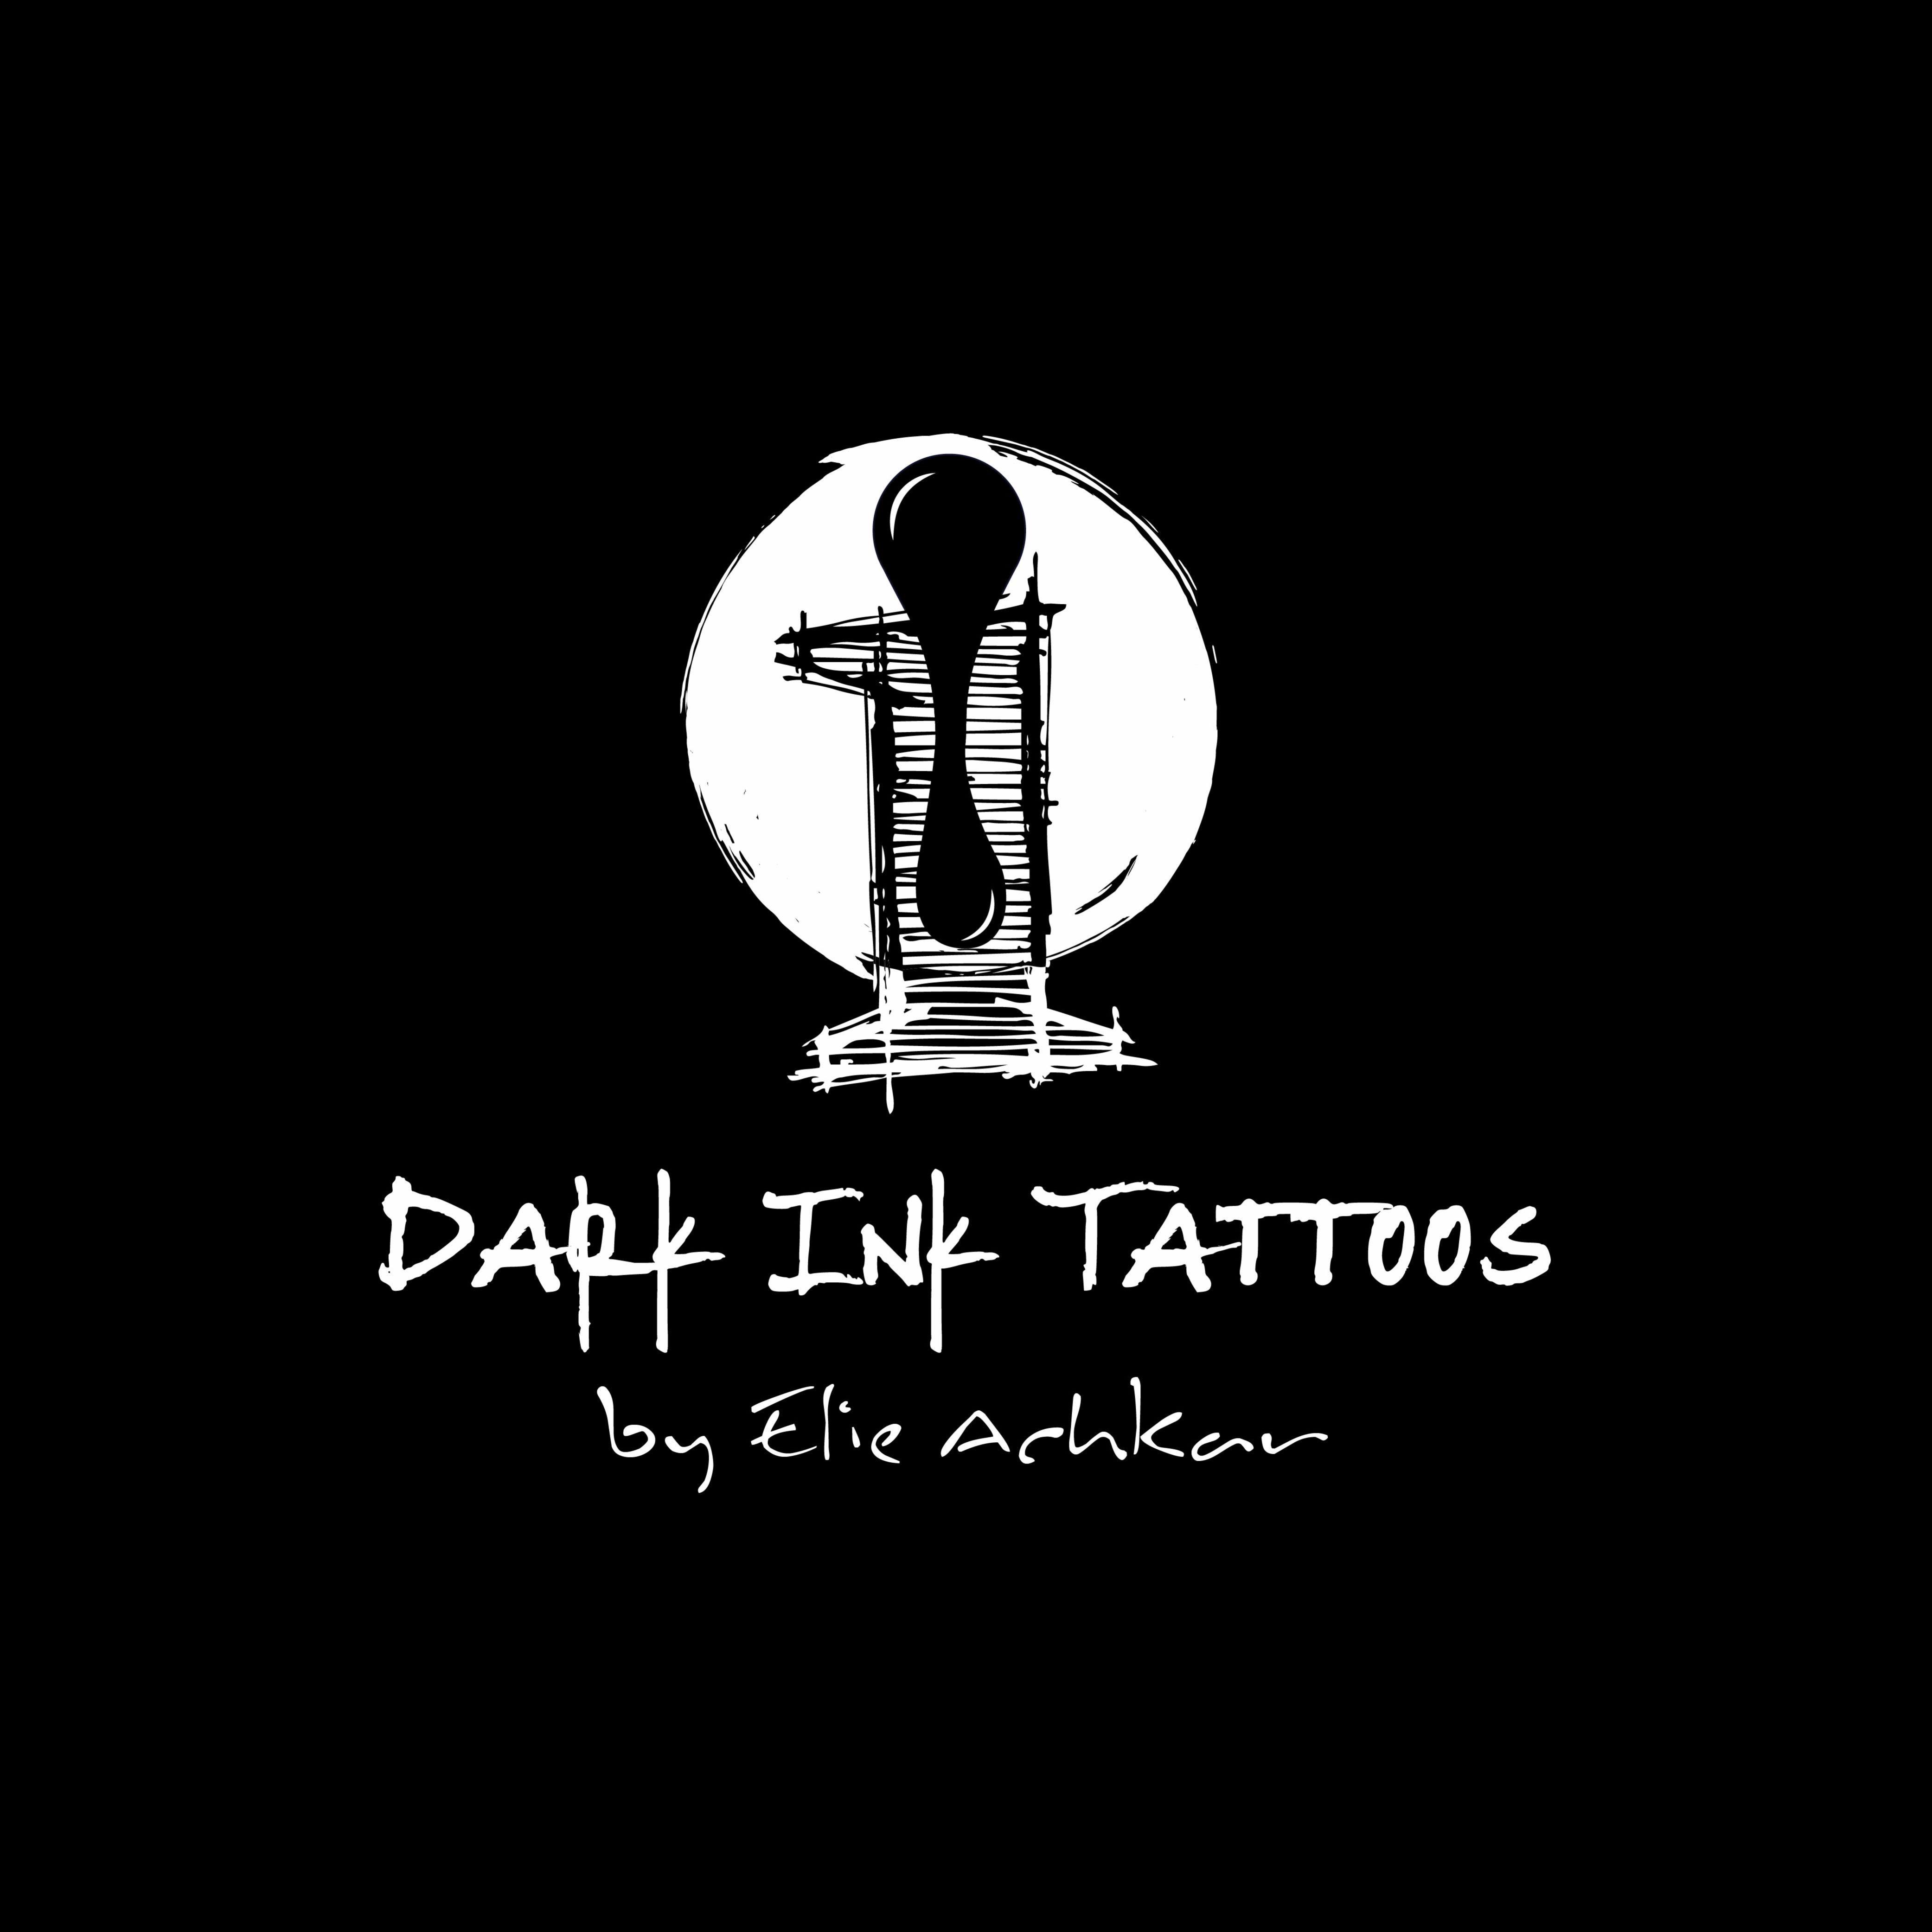 How To Get a Dark Ink Tattoo Harmlessly?